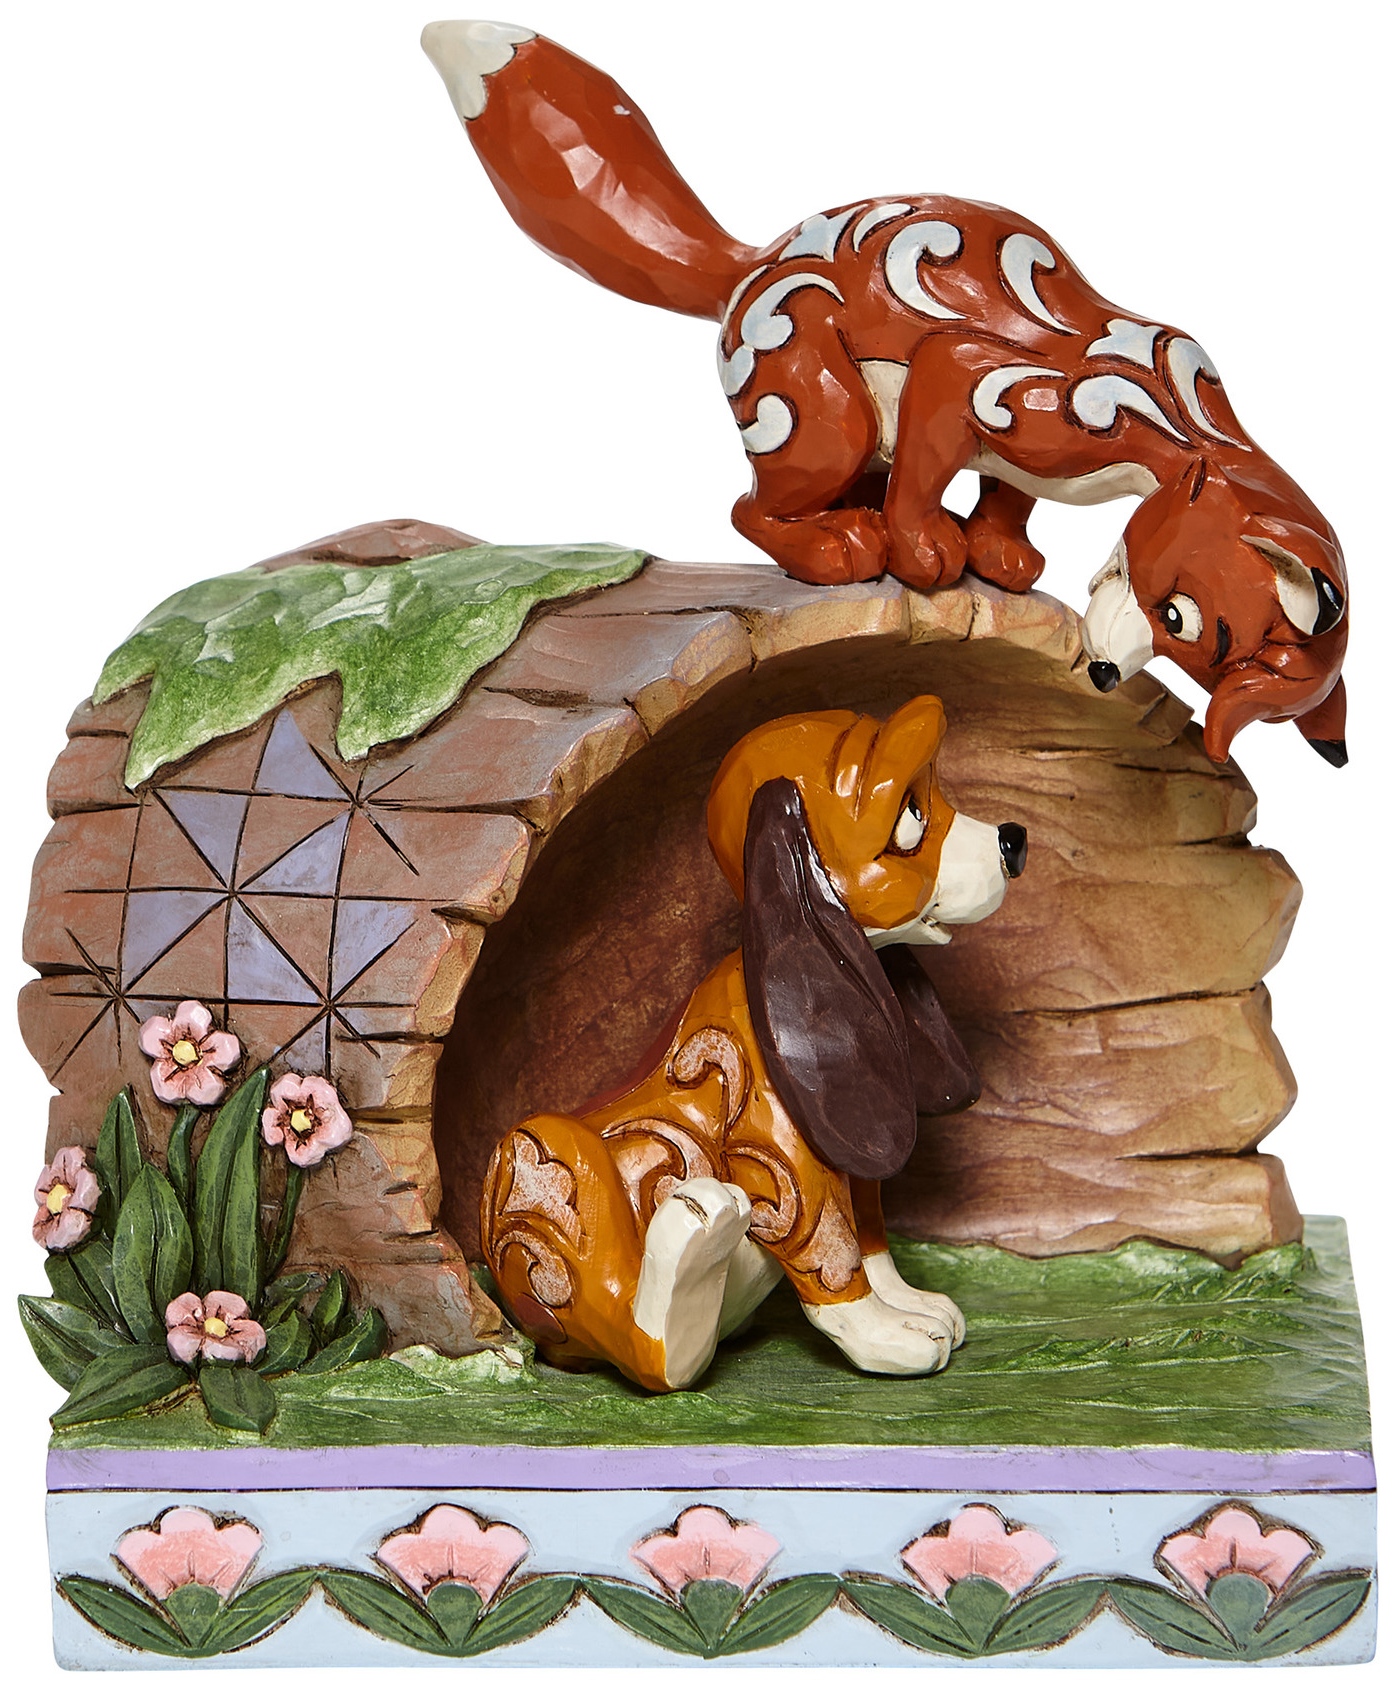 Special Sale SALE6008077 Disney Traditions by Jim Shore 6008077 Fox and Hound on Log Figurine